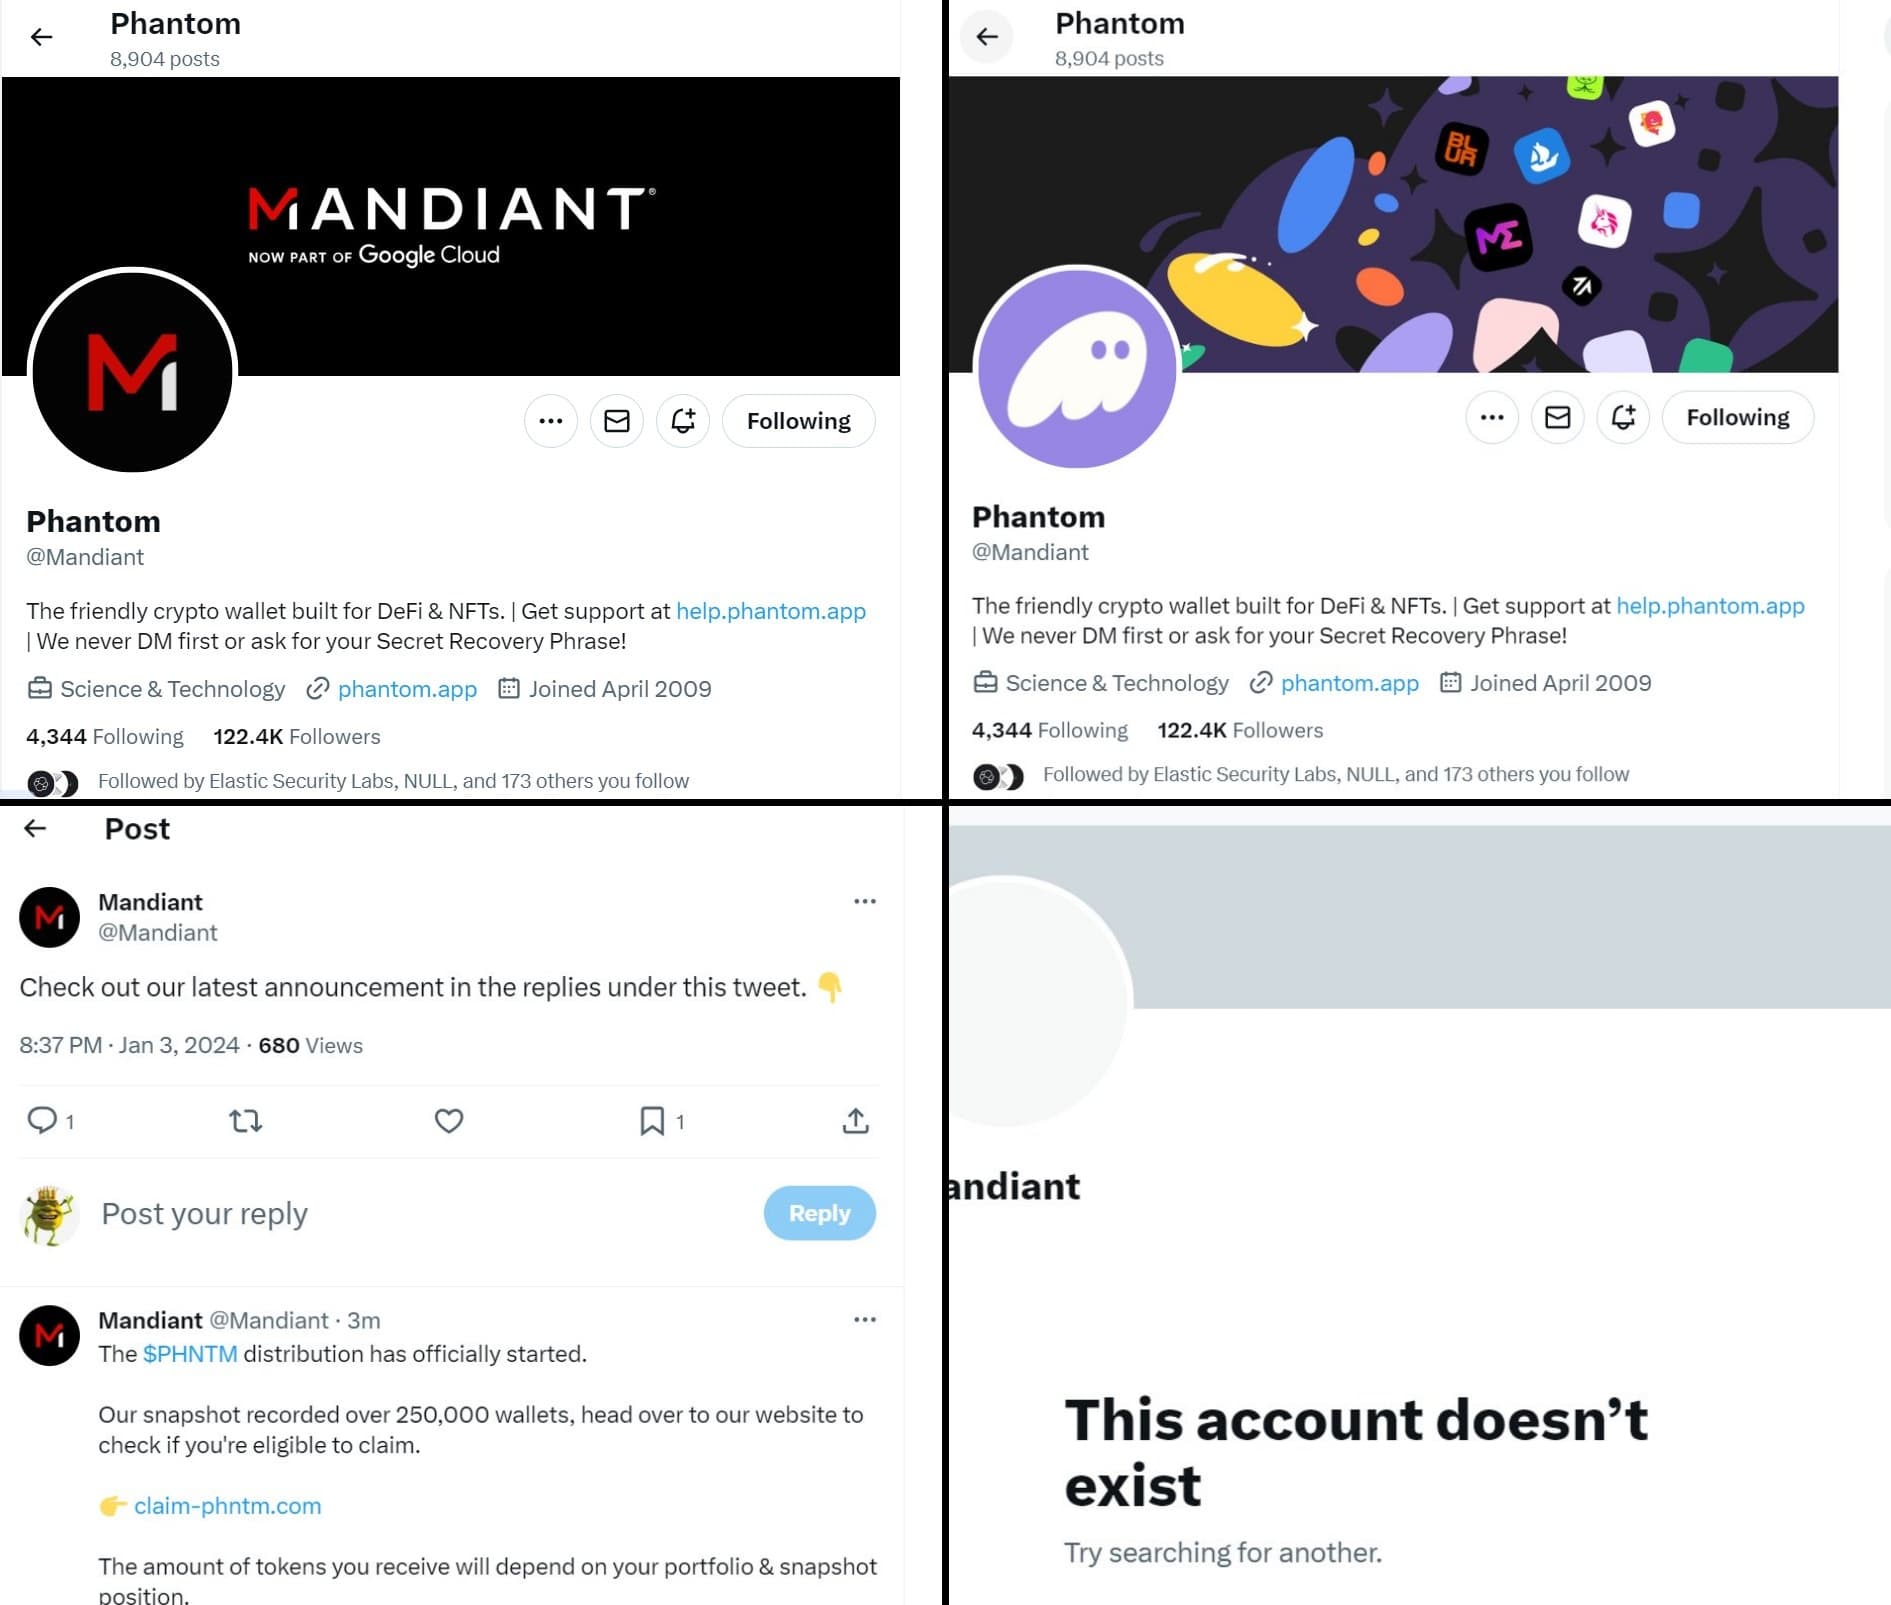 Mandiant's Twitter breach adds to a history of high-profile hacks. Scammers exploit vulnerabilities; secure accounts with tips.